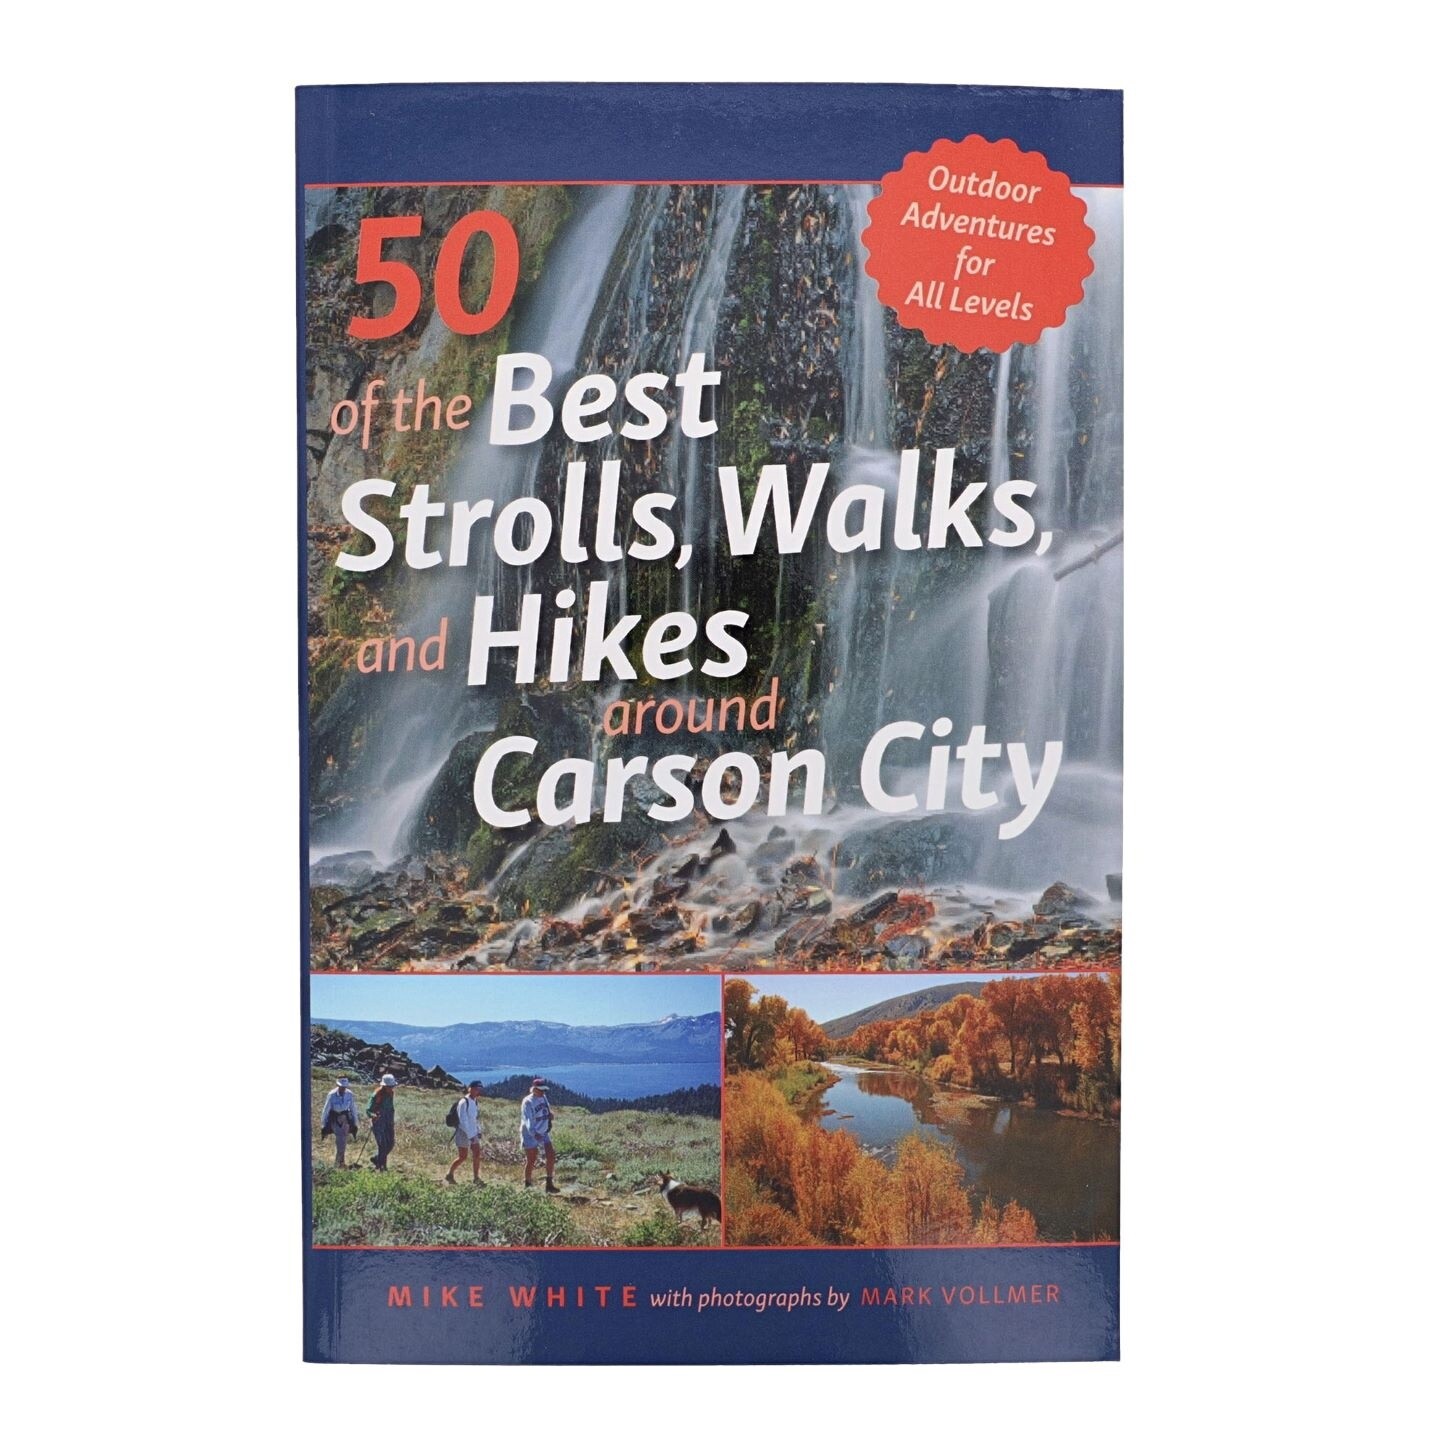 50 of the Best Strolls, Walks, and Hikes around Carson City by Mike White